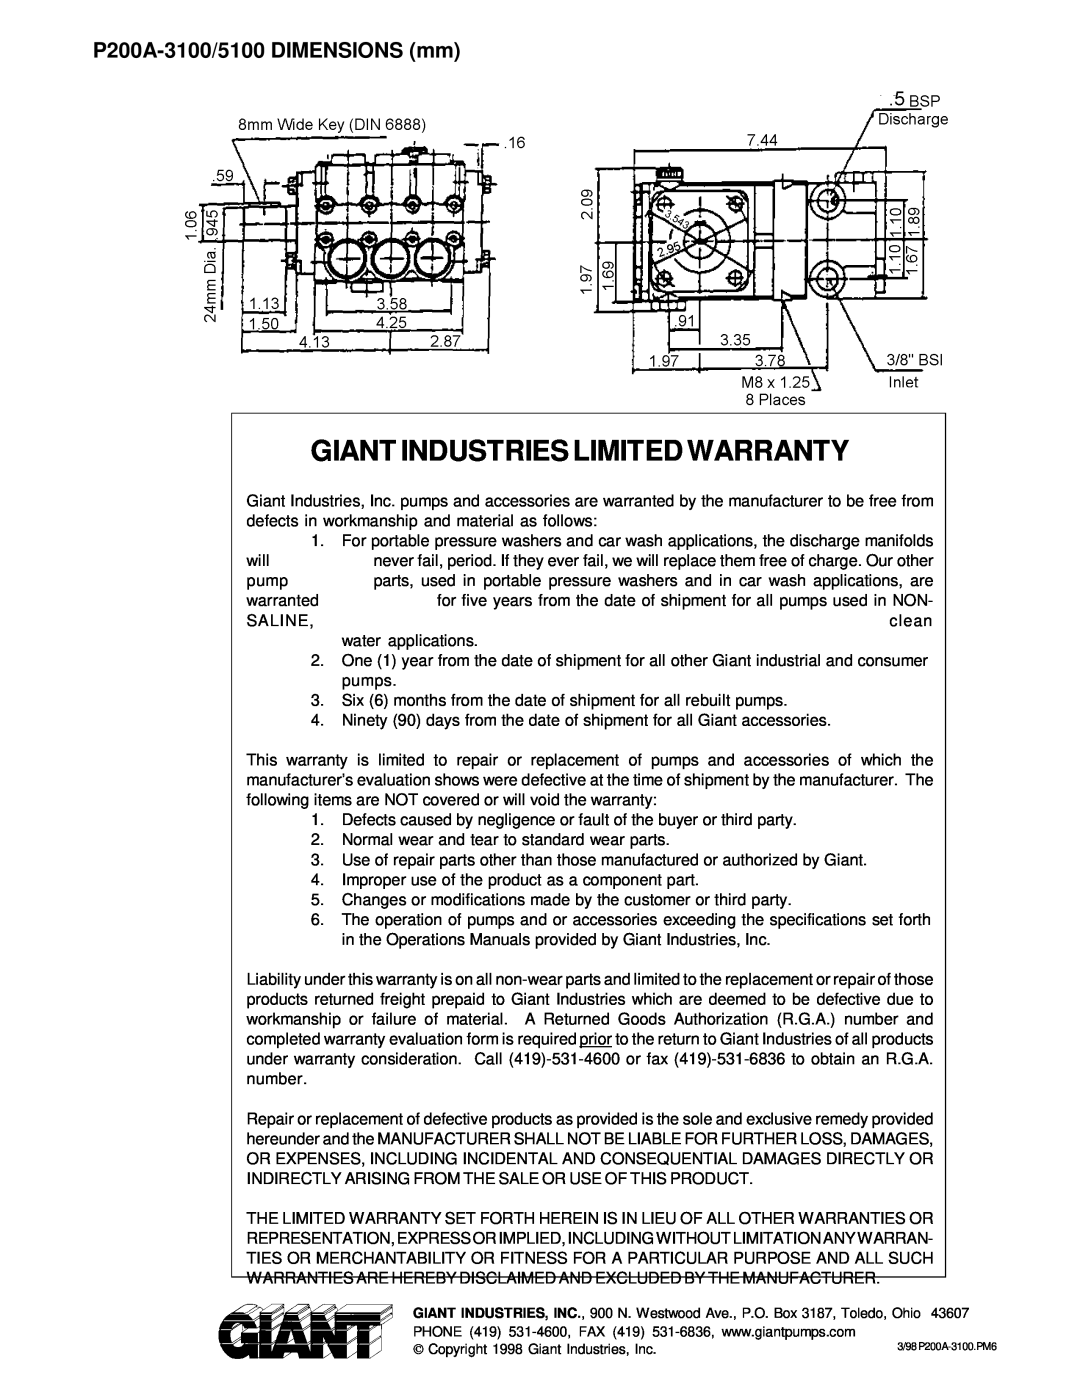 Giant Triplex Ceramic Plunger Pump Giant Industries Limited Warranty, P200A-3100/5100DIMENSIONS mm 